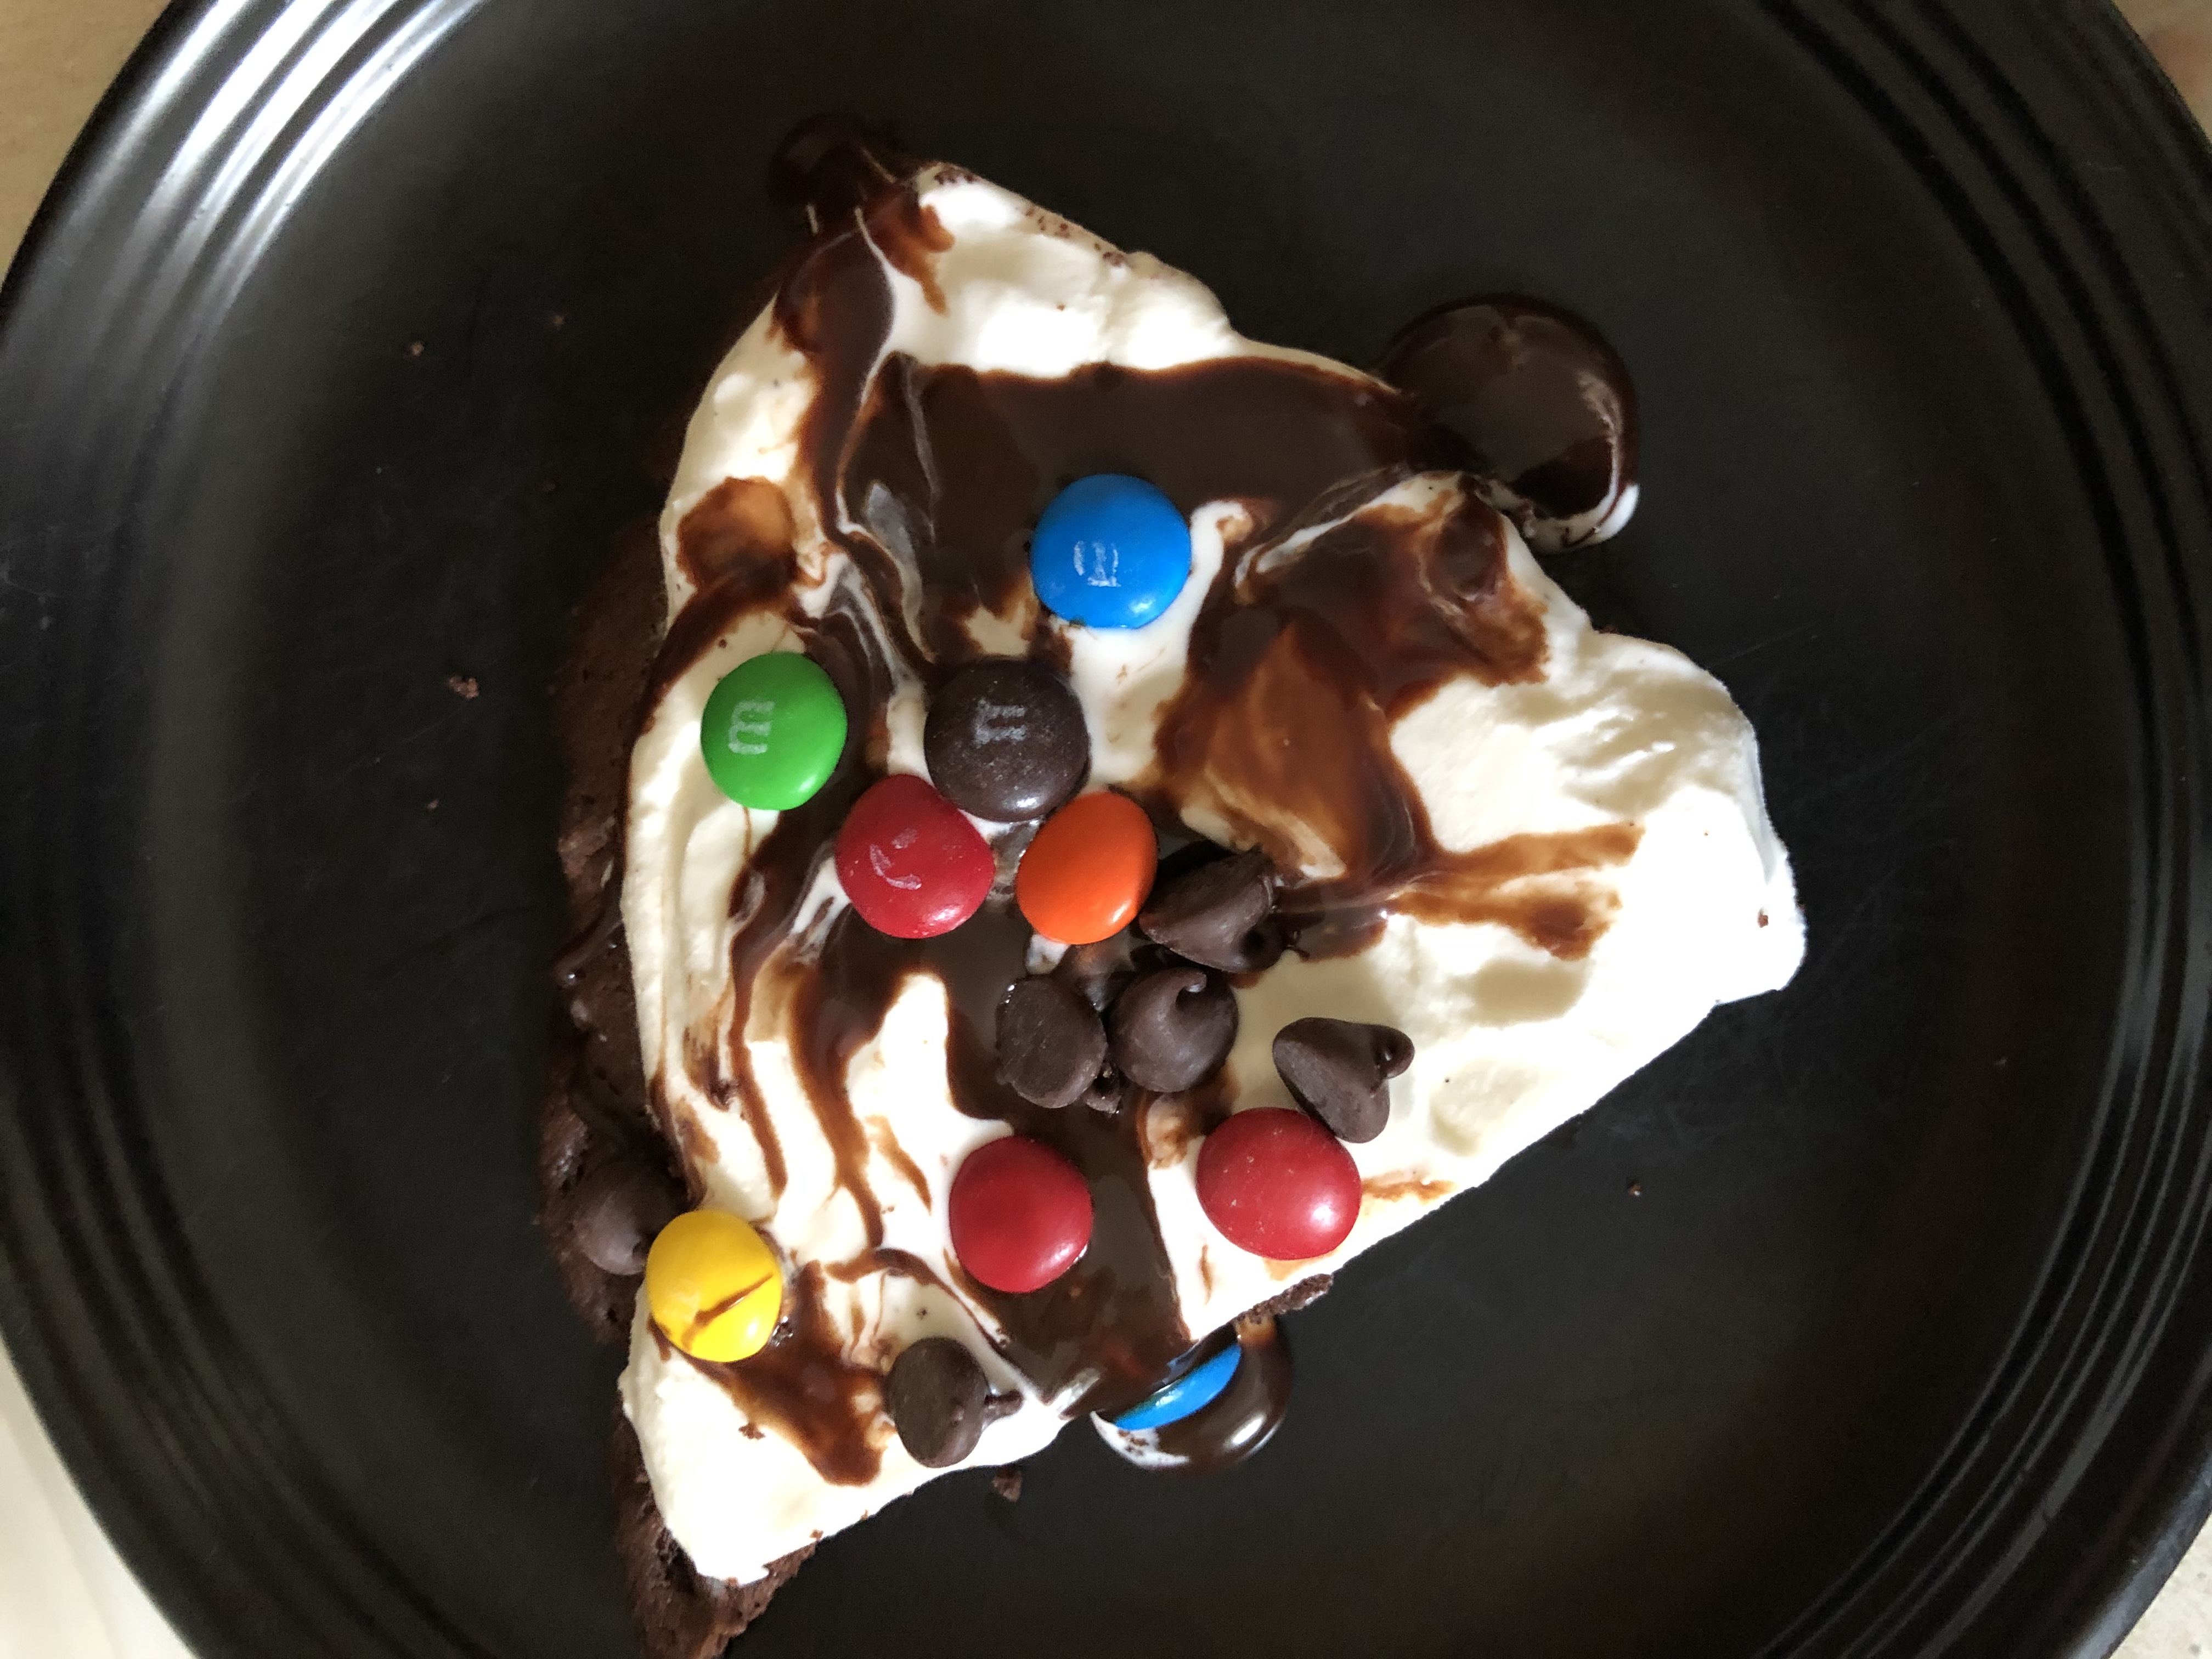 Ice cream pizza with toppings